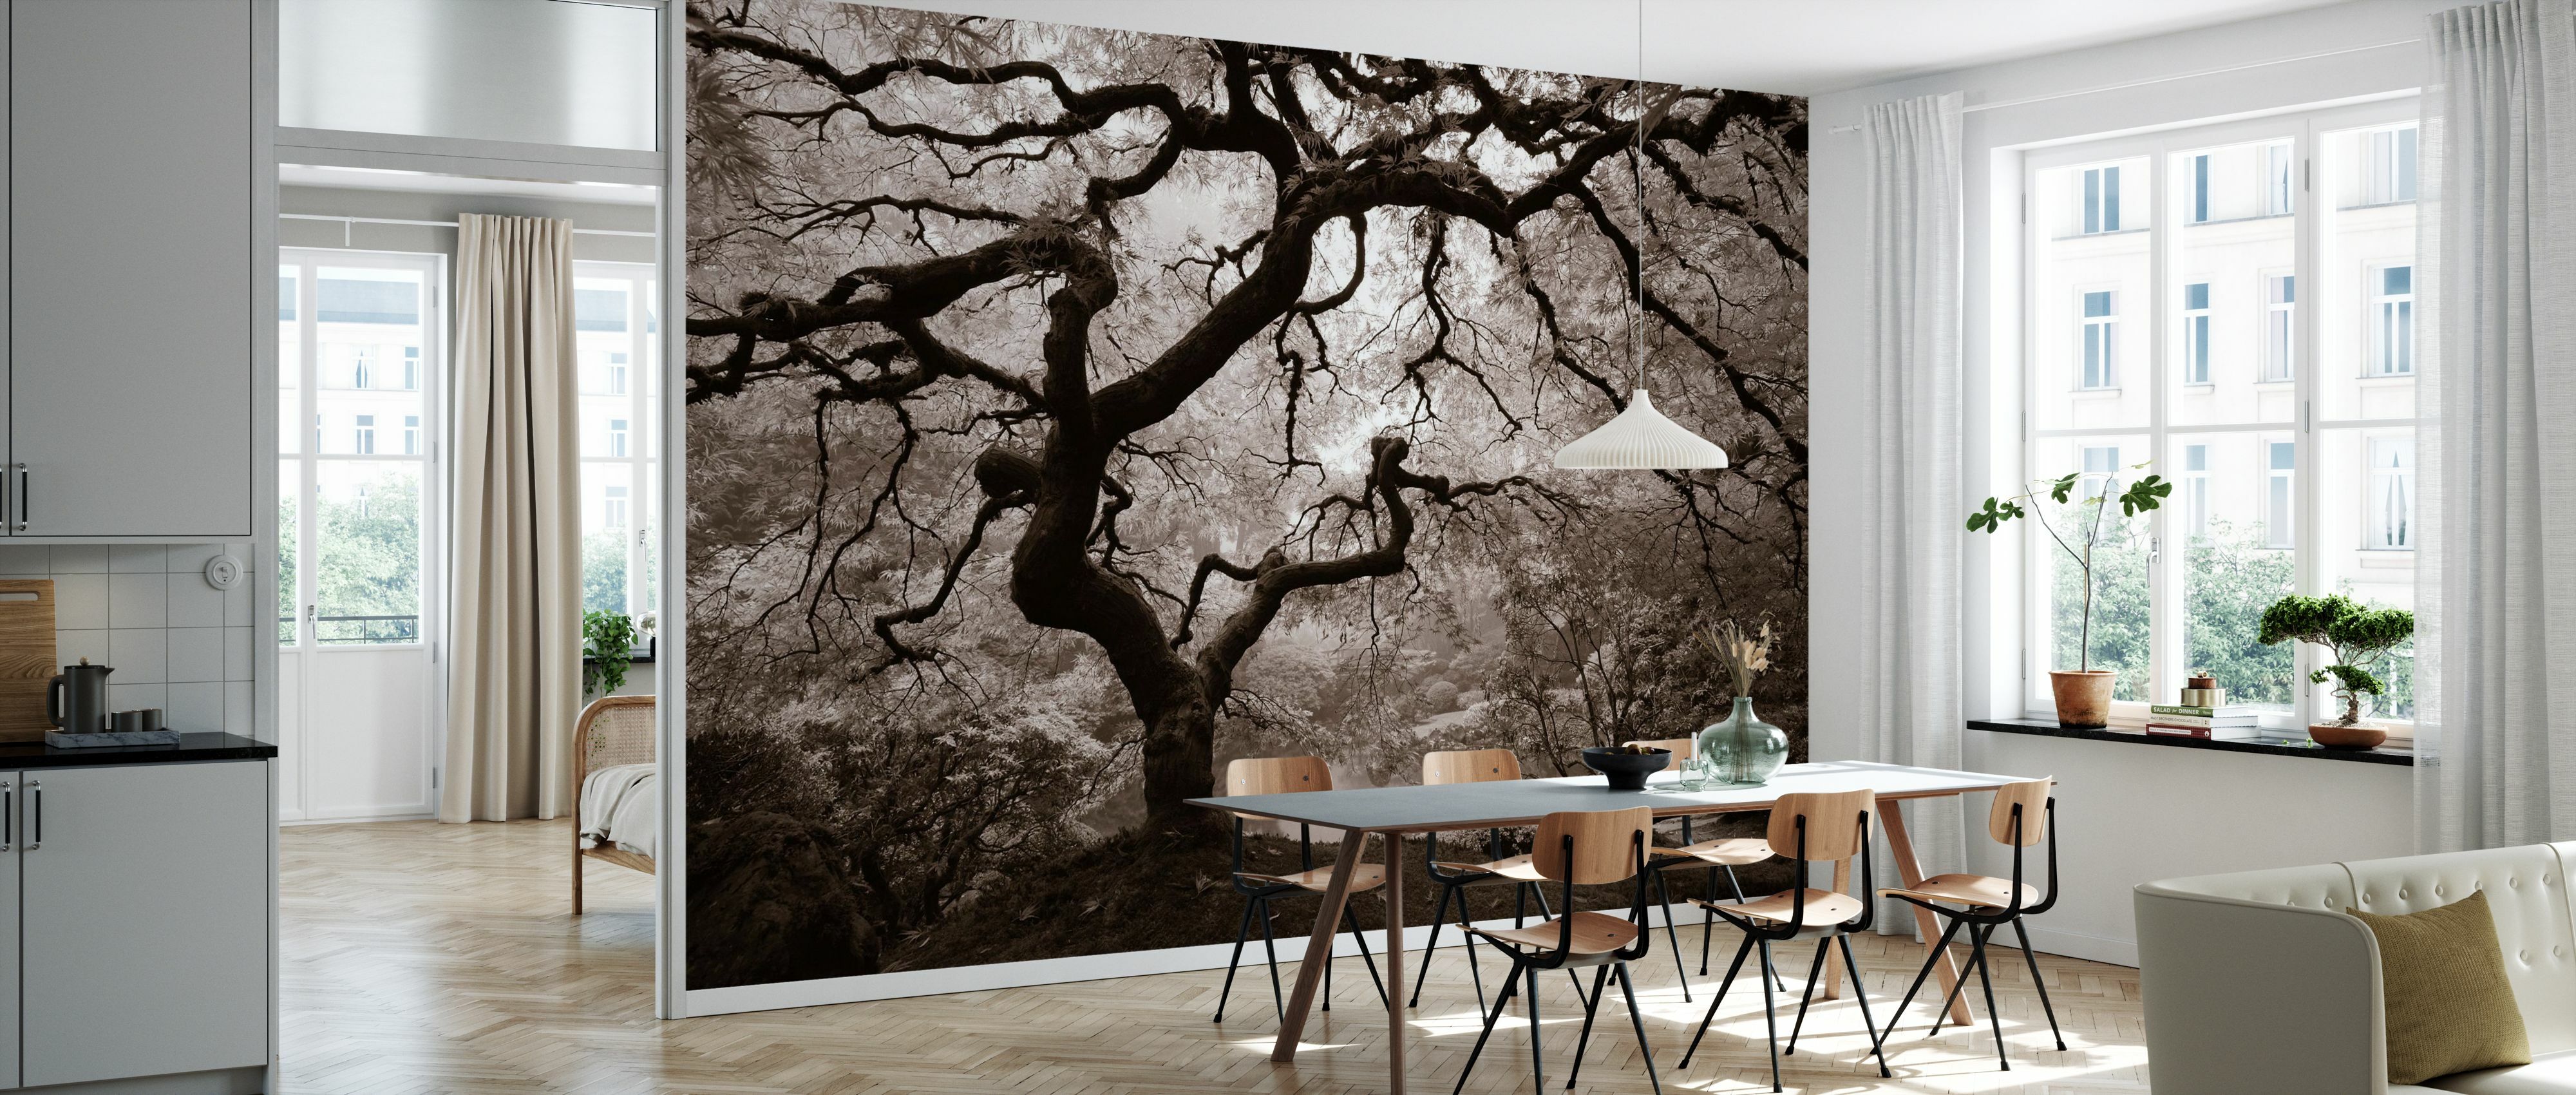 Autumn Tree Plants Leaves Road Wallpaper Mural Photo Wall Home Room Poster Decor 